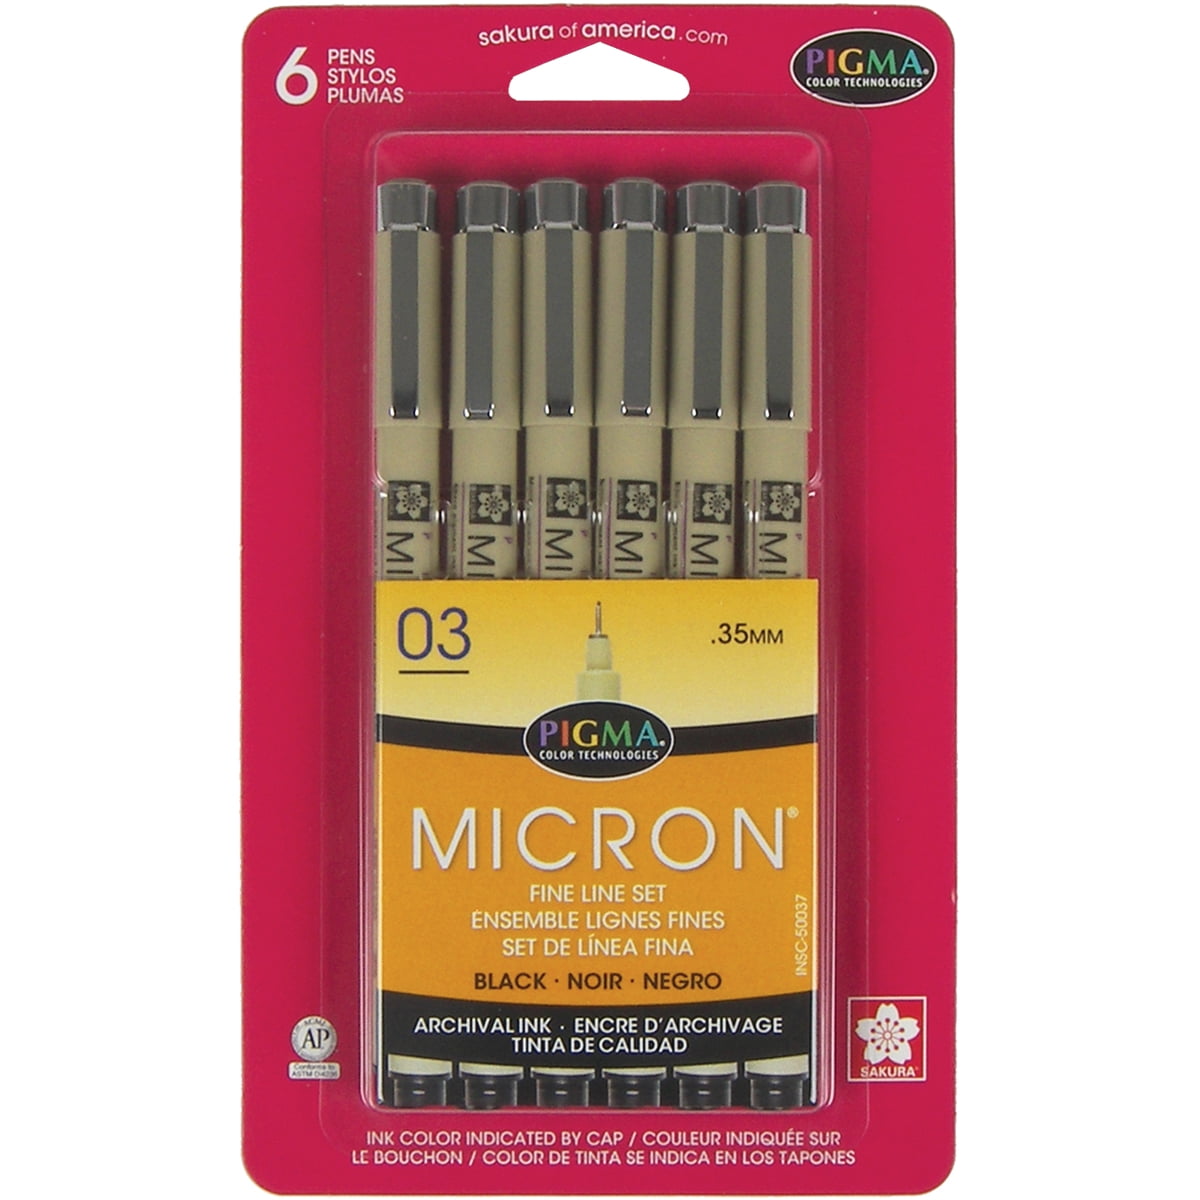 SAKURA Pigma Micron Fineliner Pens - Archival Black and Colored Ink Pens -  Pens for Writing, Drawing, or Journaling - Assorted Point Sizes - 73 Pack